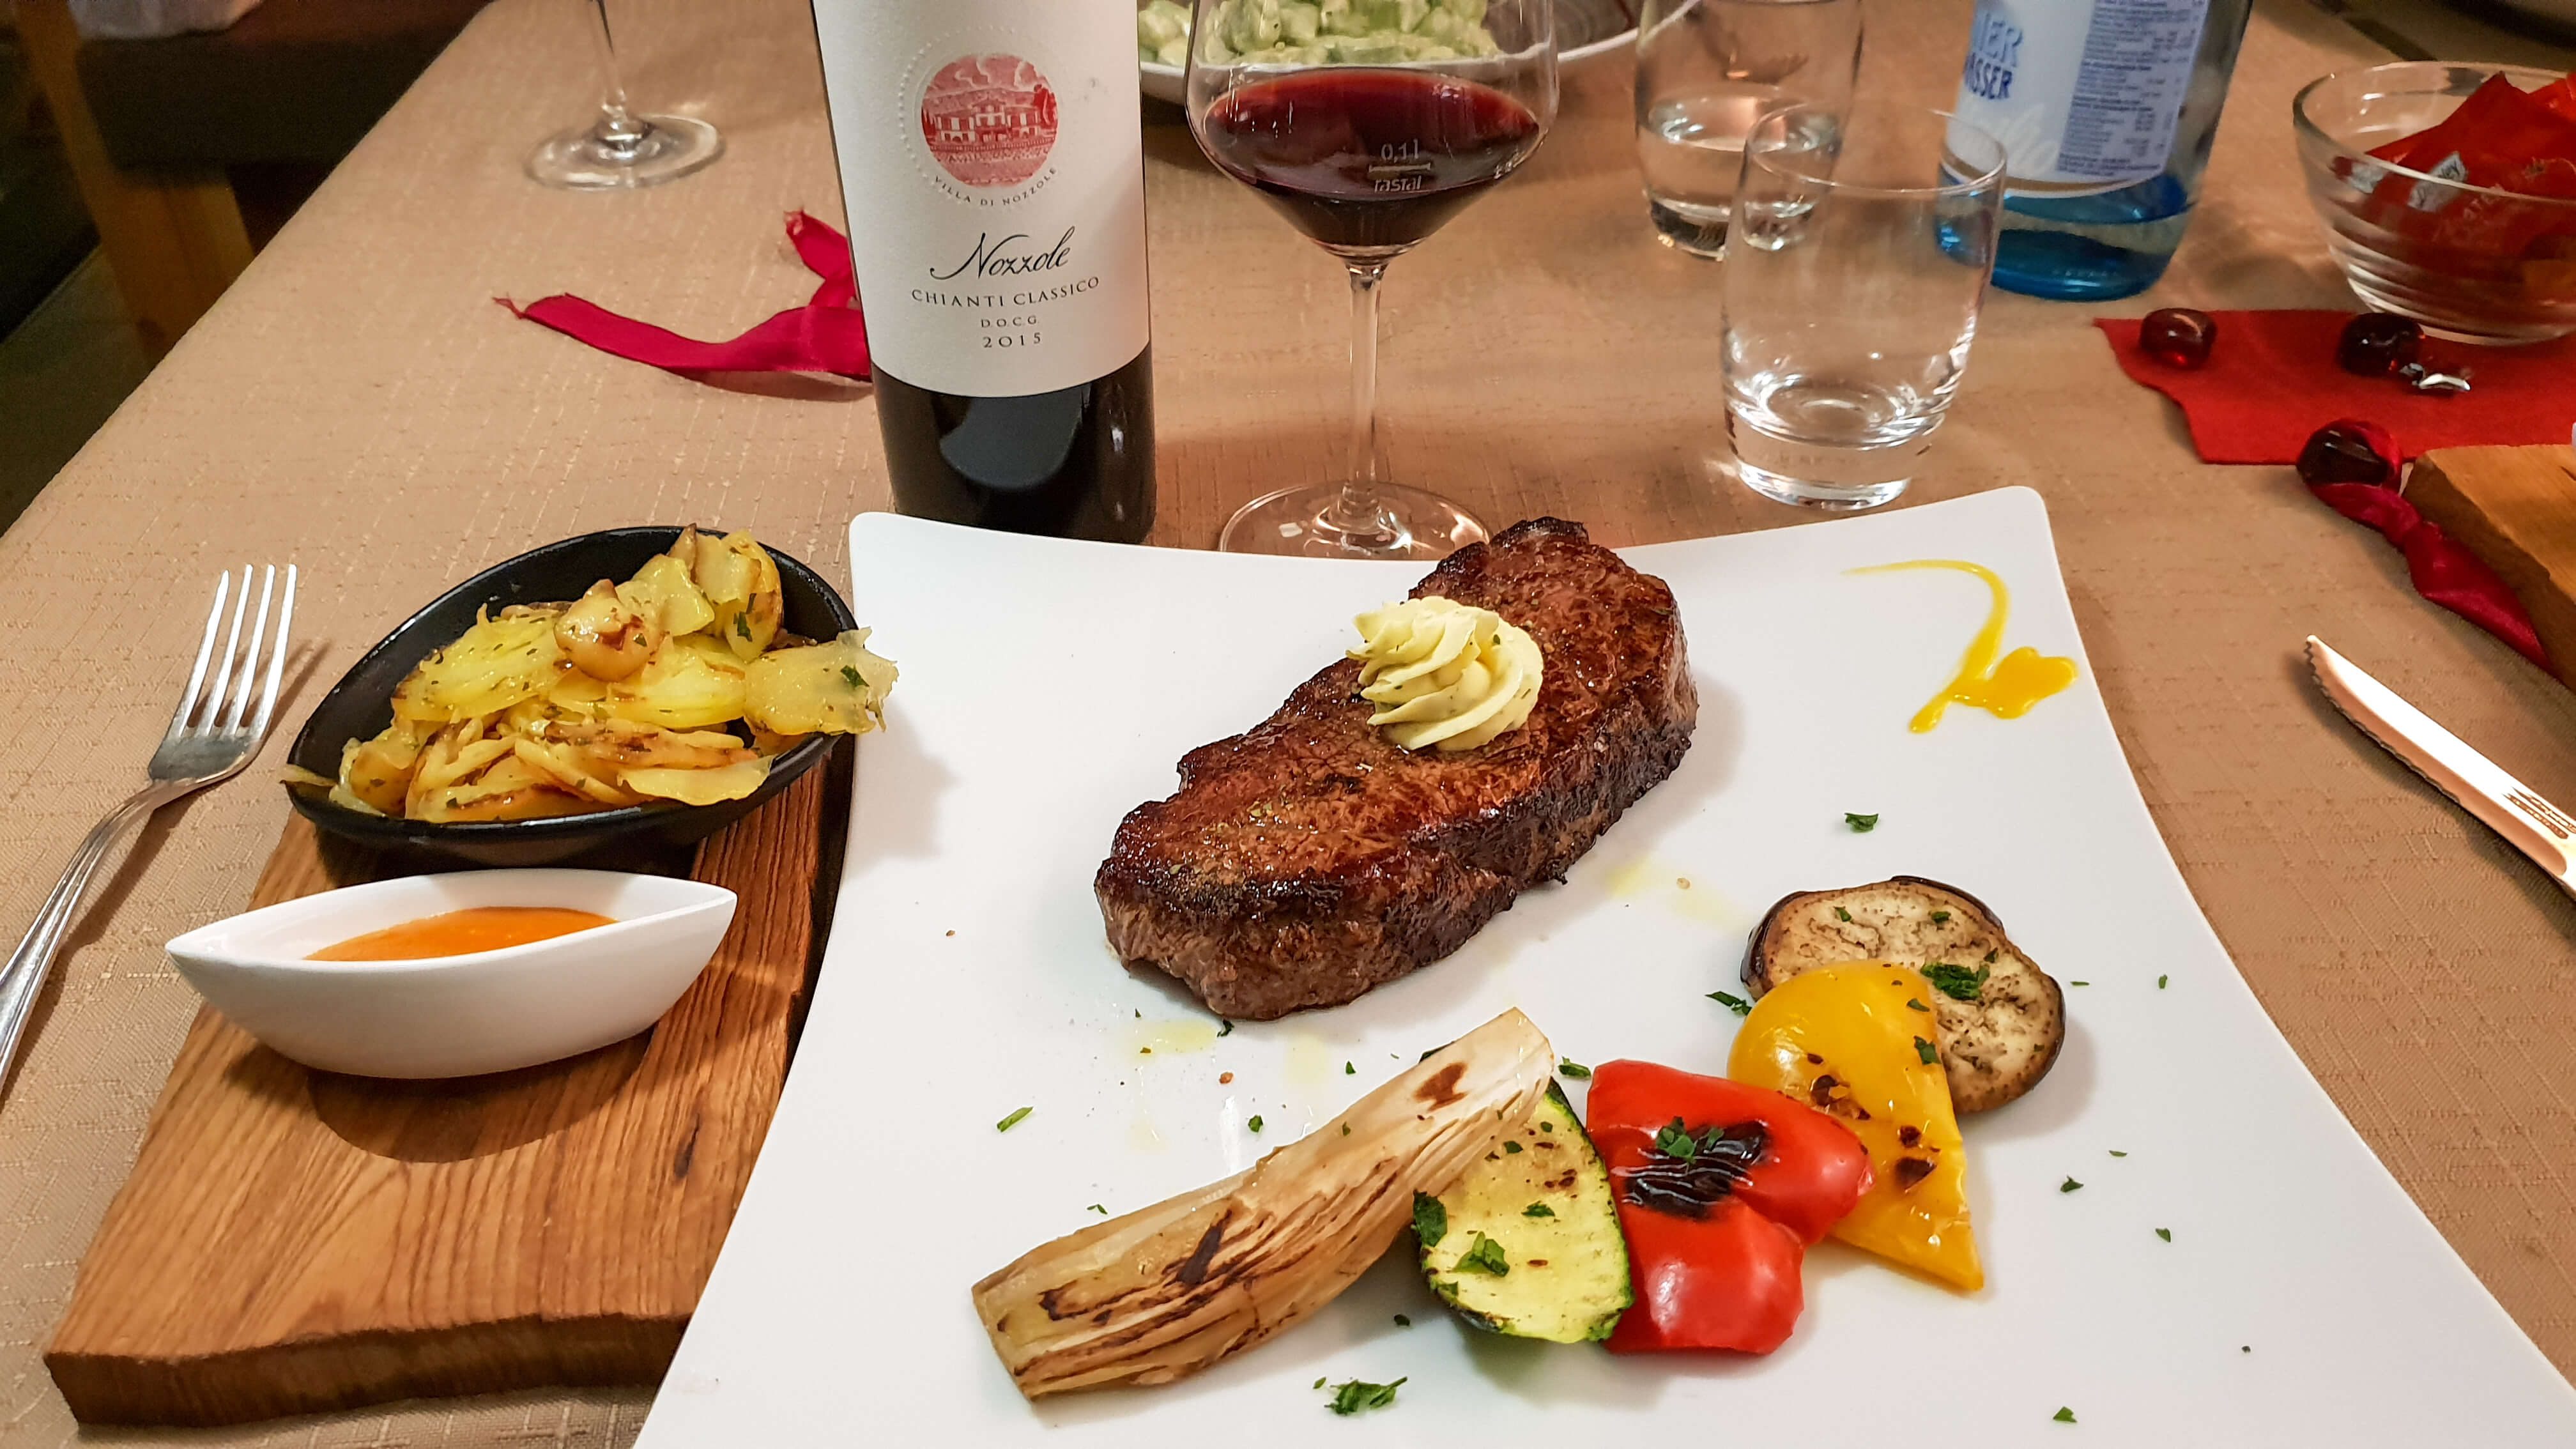 medium-steak-with-potatoes-and-mountain-vegetables-served-with-a-bottle-of-red-chianti-wine-in-selva-di-val-gardena-italy